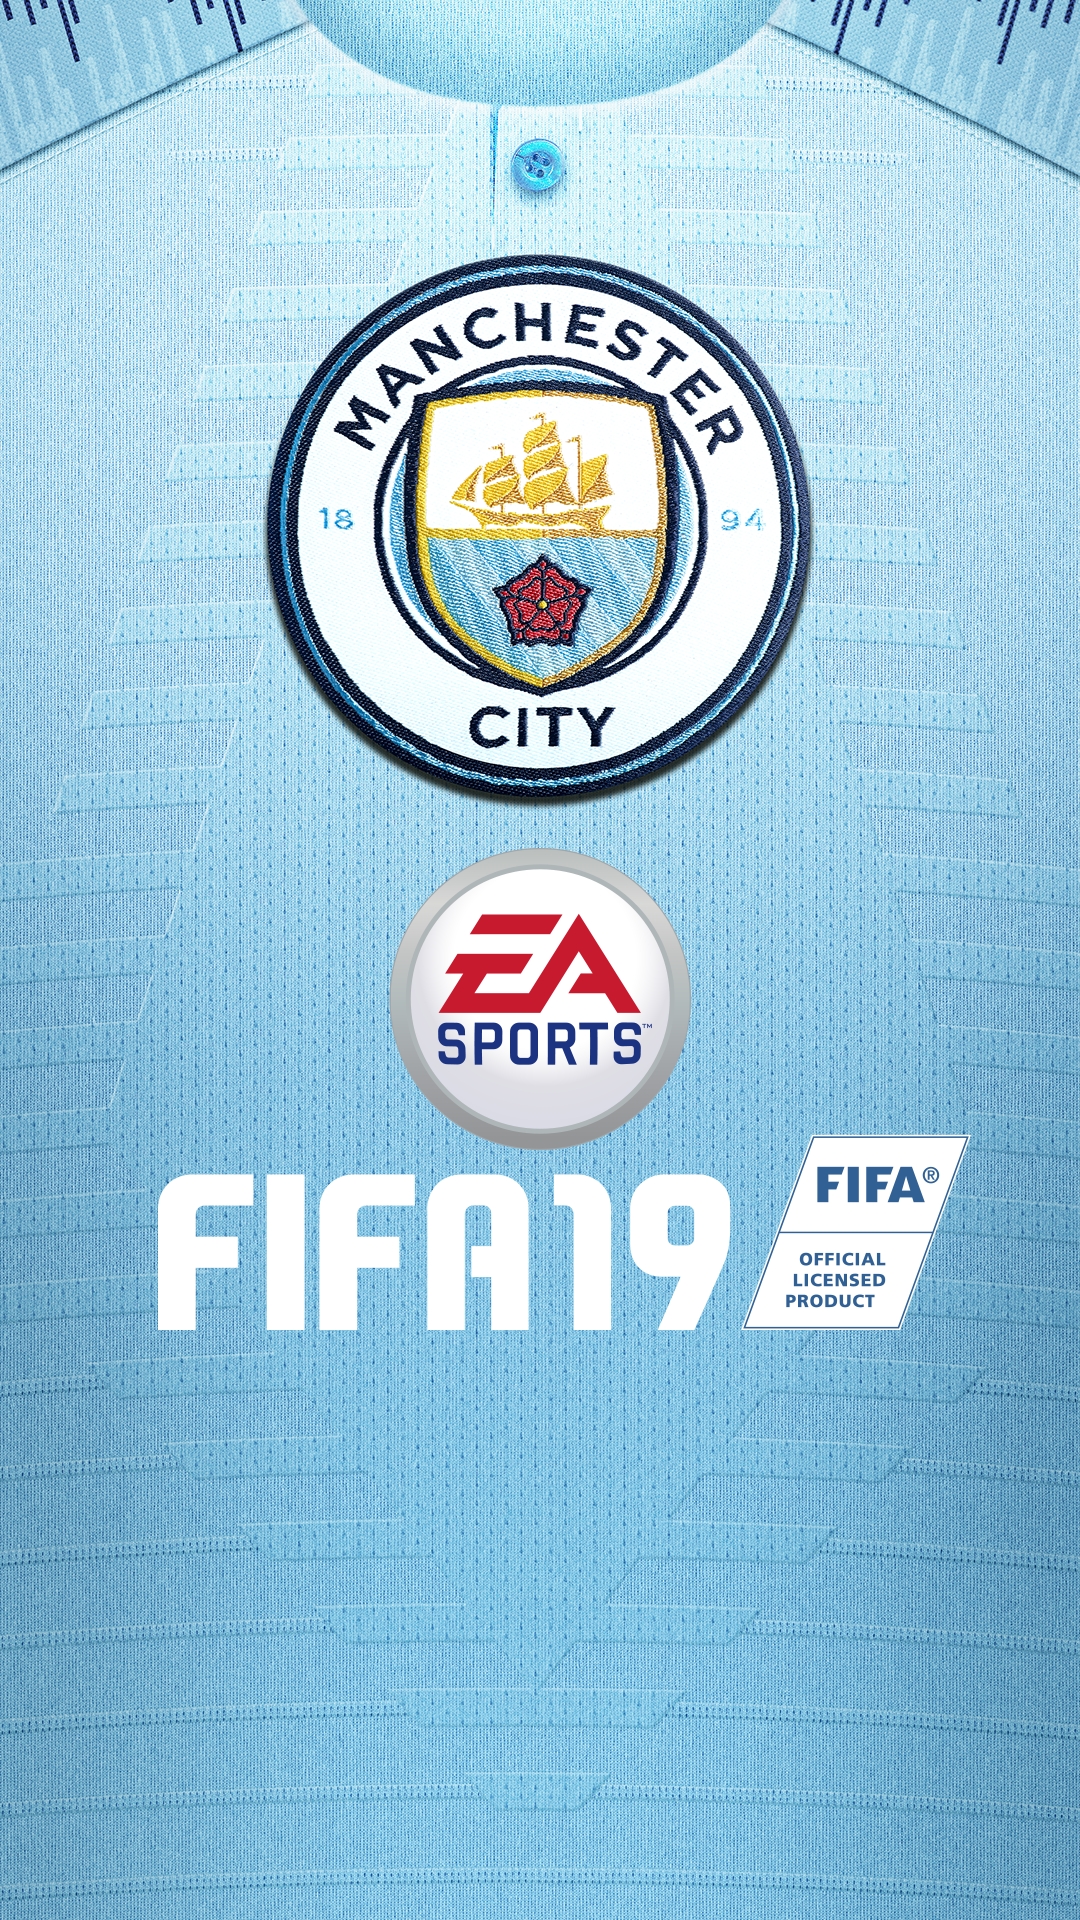 FIFA 19 - Manchester City F.C. Club Pack - EA SPORTS